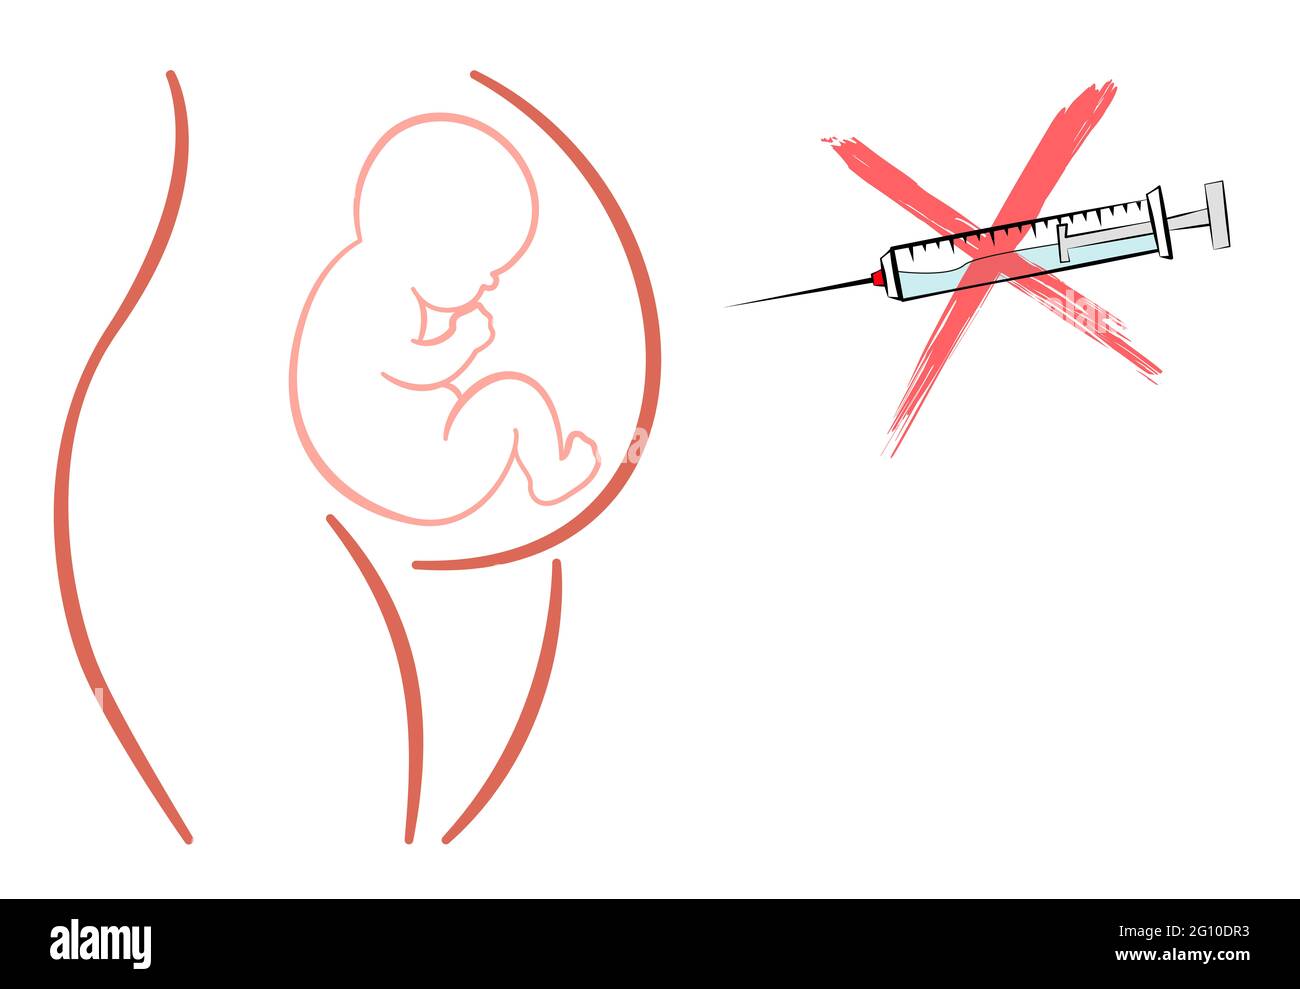 Pregnant woman baby symbol with crossed out syringe - outline illustration on white background. Stock Photo